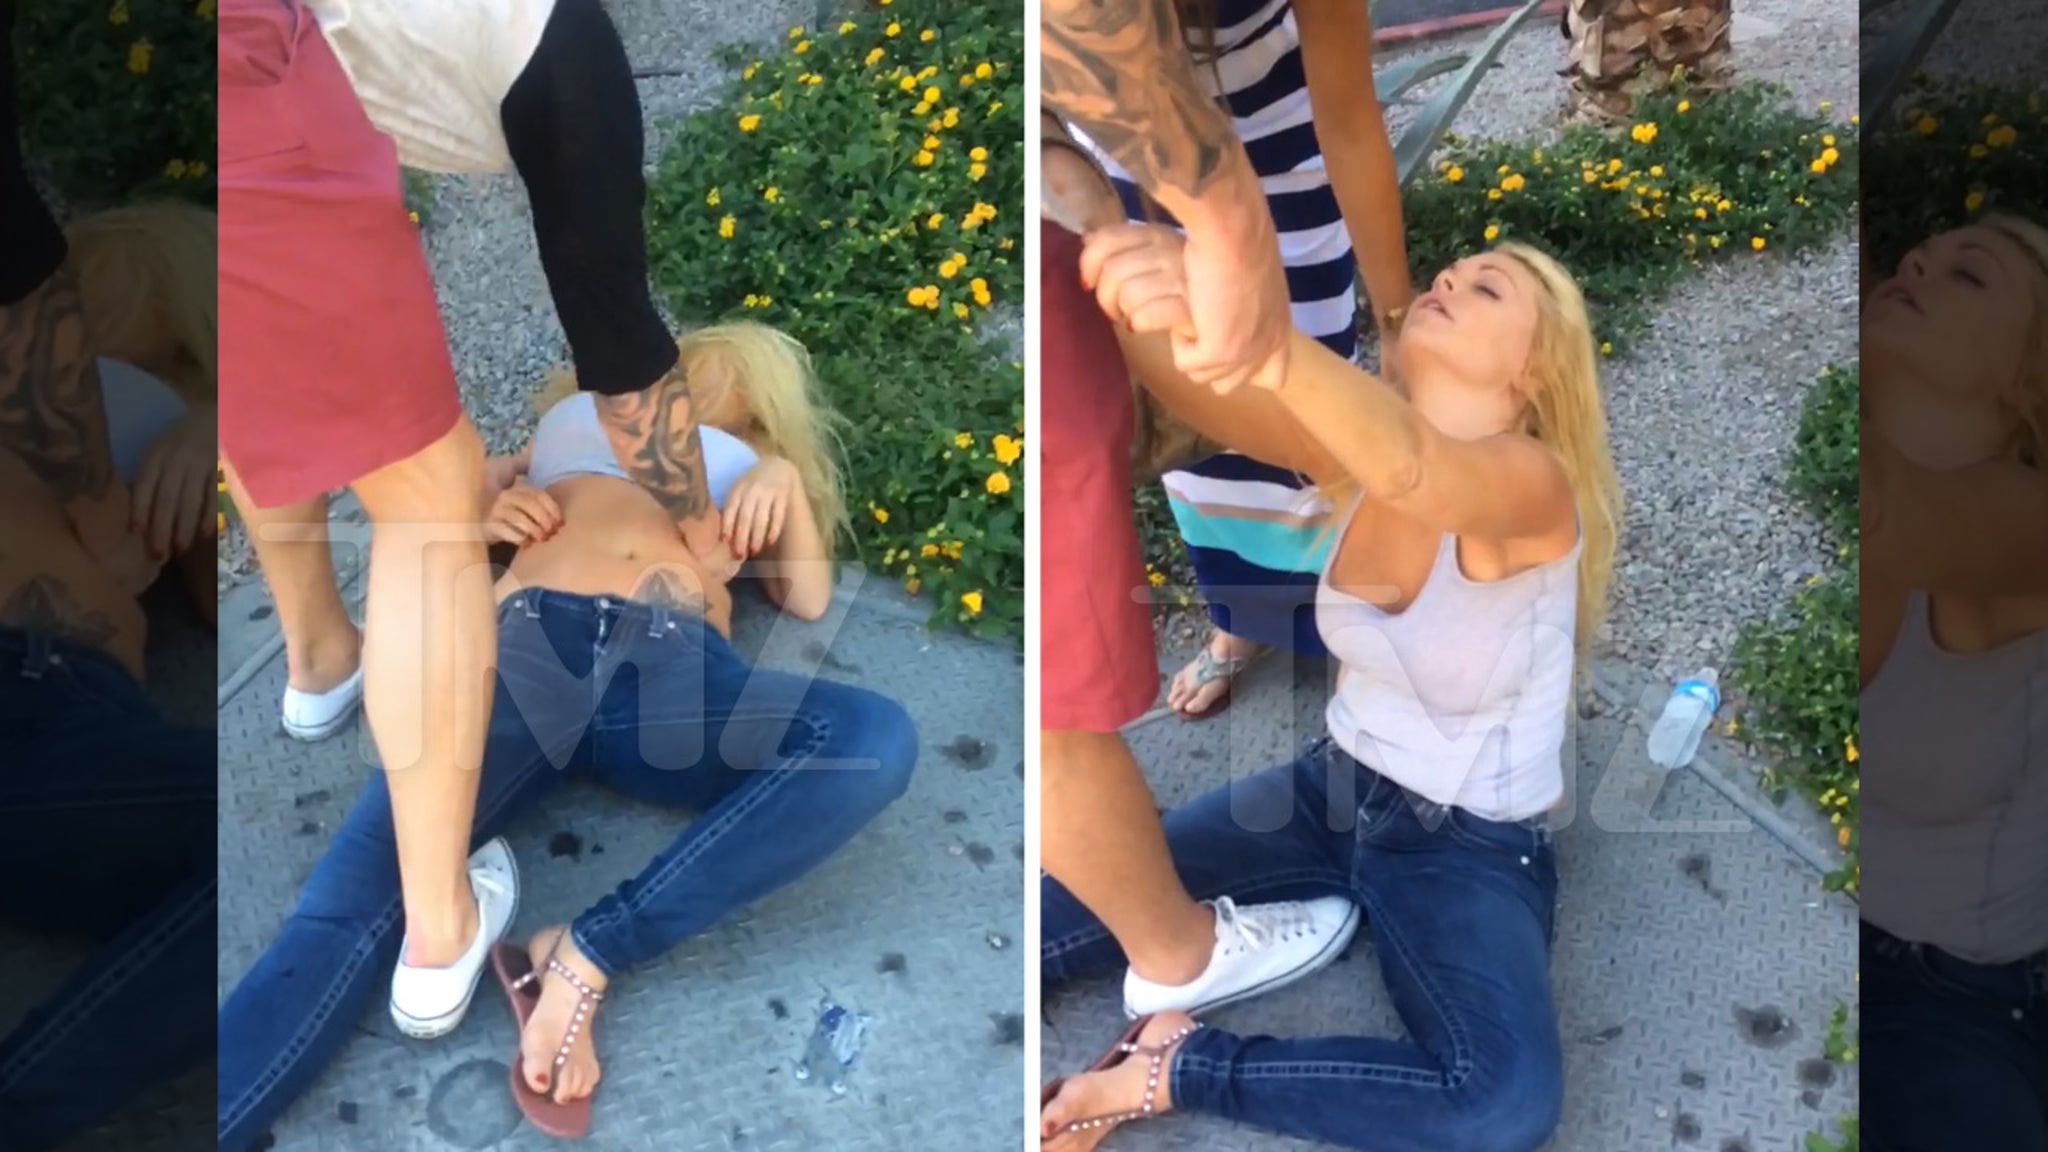 Drunk Girls Passed Out Violated - Porn Star Jesse Jane -- Passed OUT COLD On the Vegas Strip! (VIDEO)